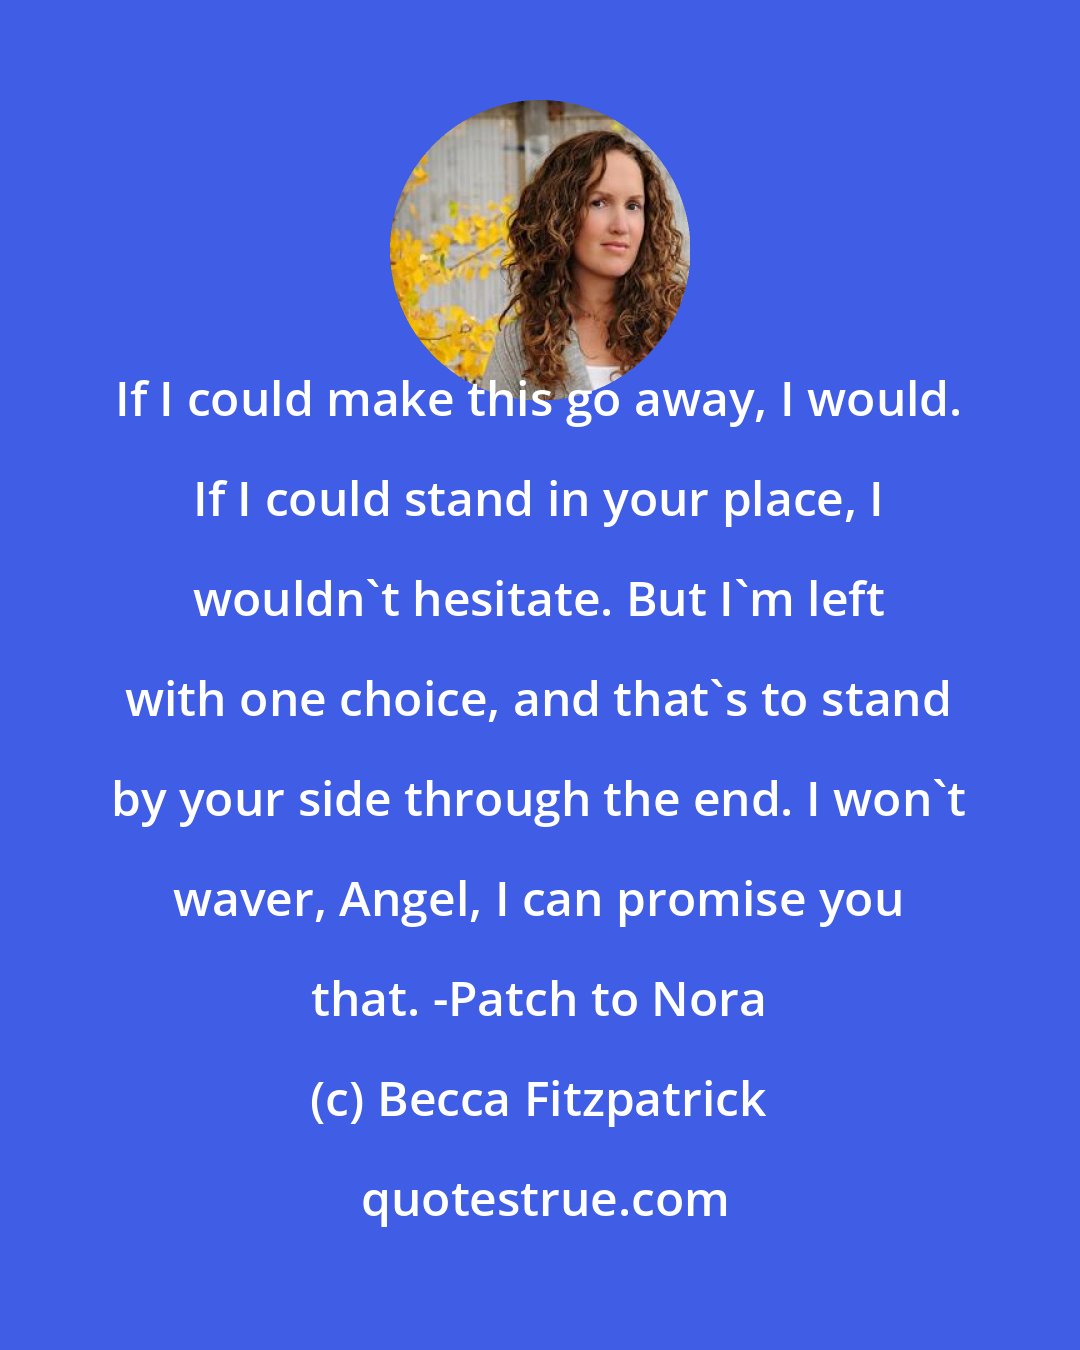 Becca Fitzpatrick: If I could make this go away, I would. If I could stand in your place, I wouldn't hesitate. But I'm left with one choice, and that's to stand by your side through the end. I won't waver, Angel, I can promise you that. -Patch to Nora